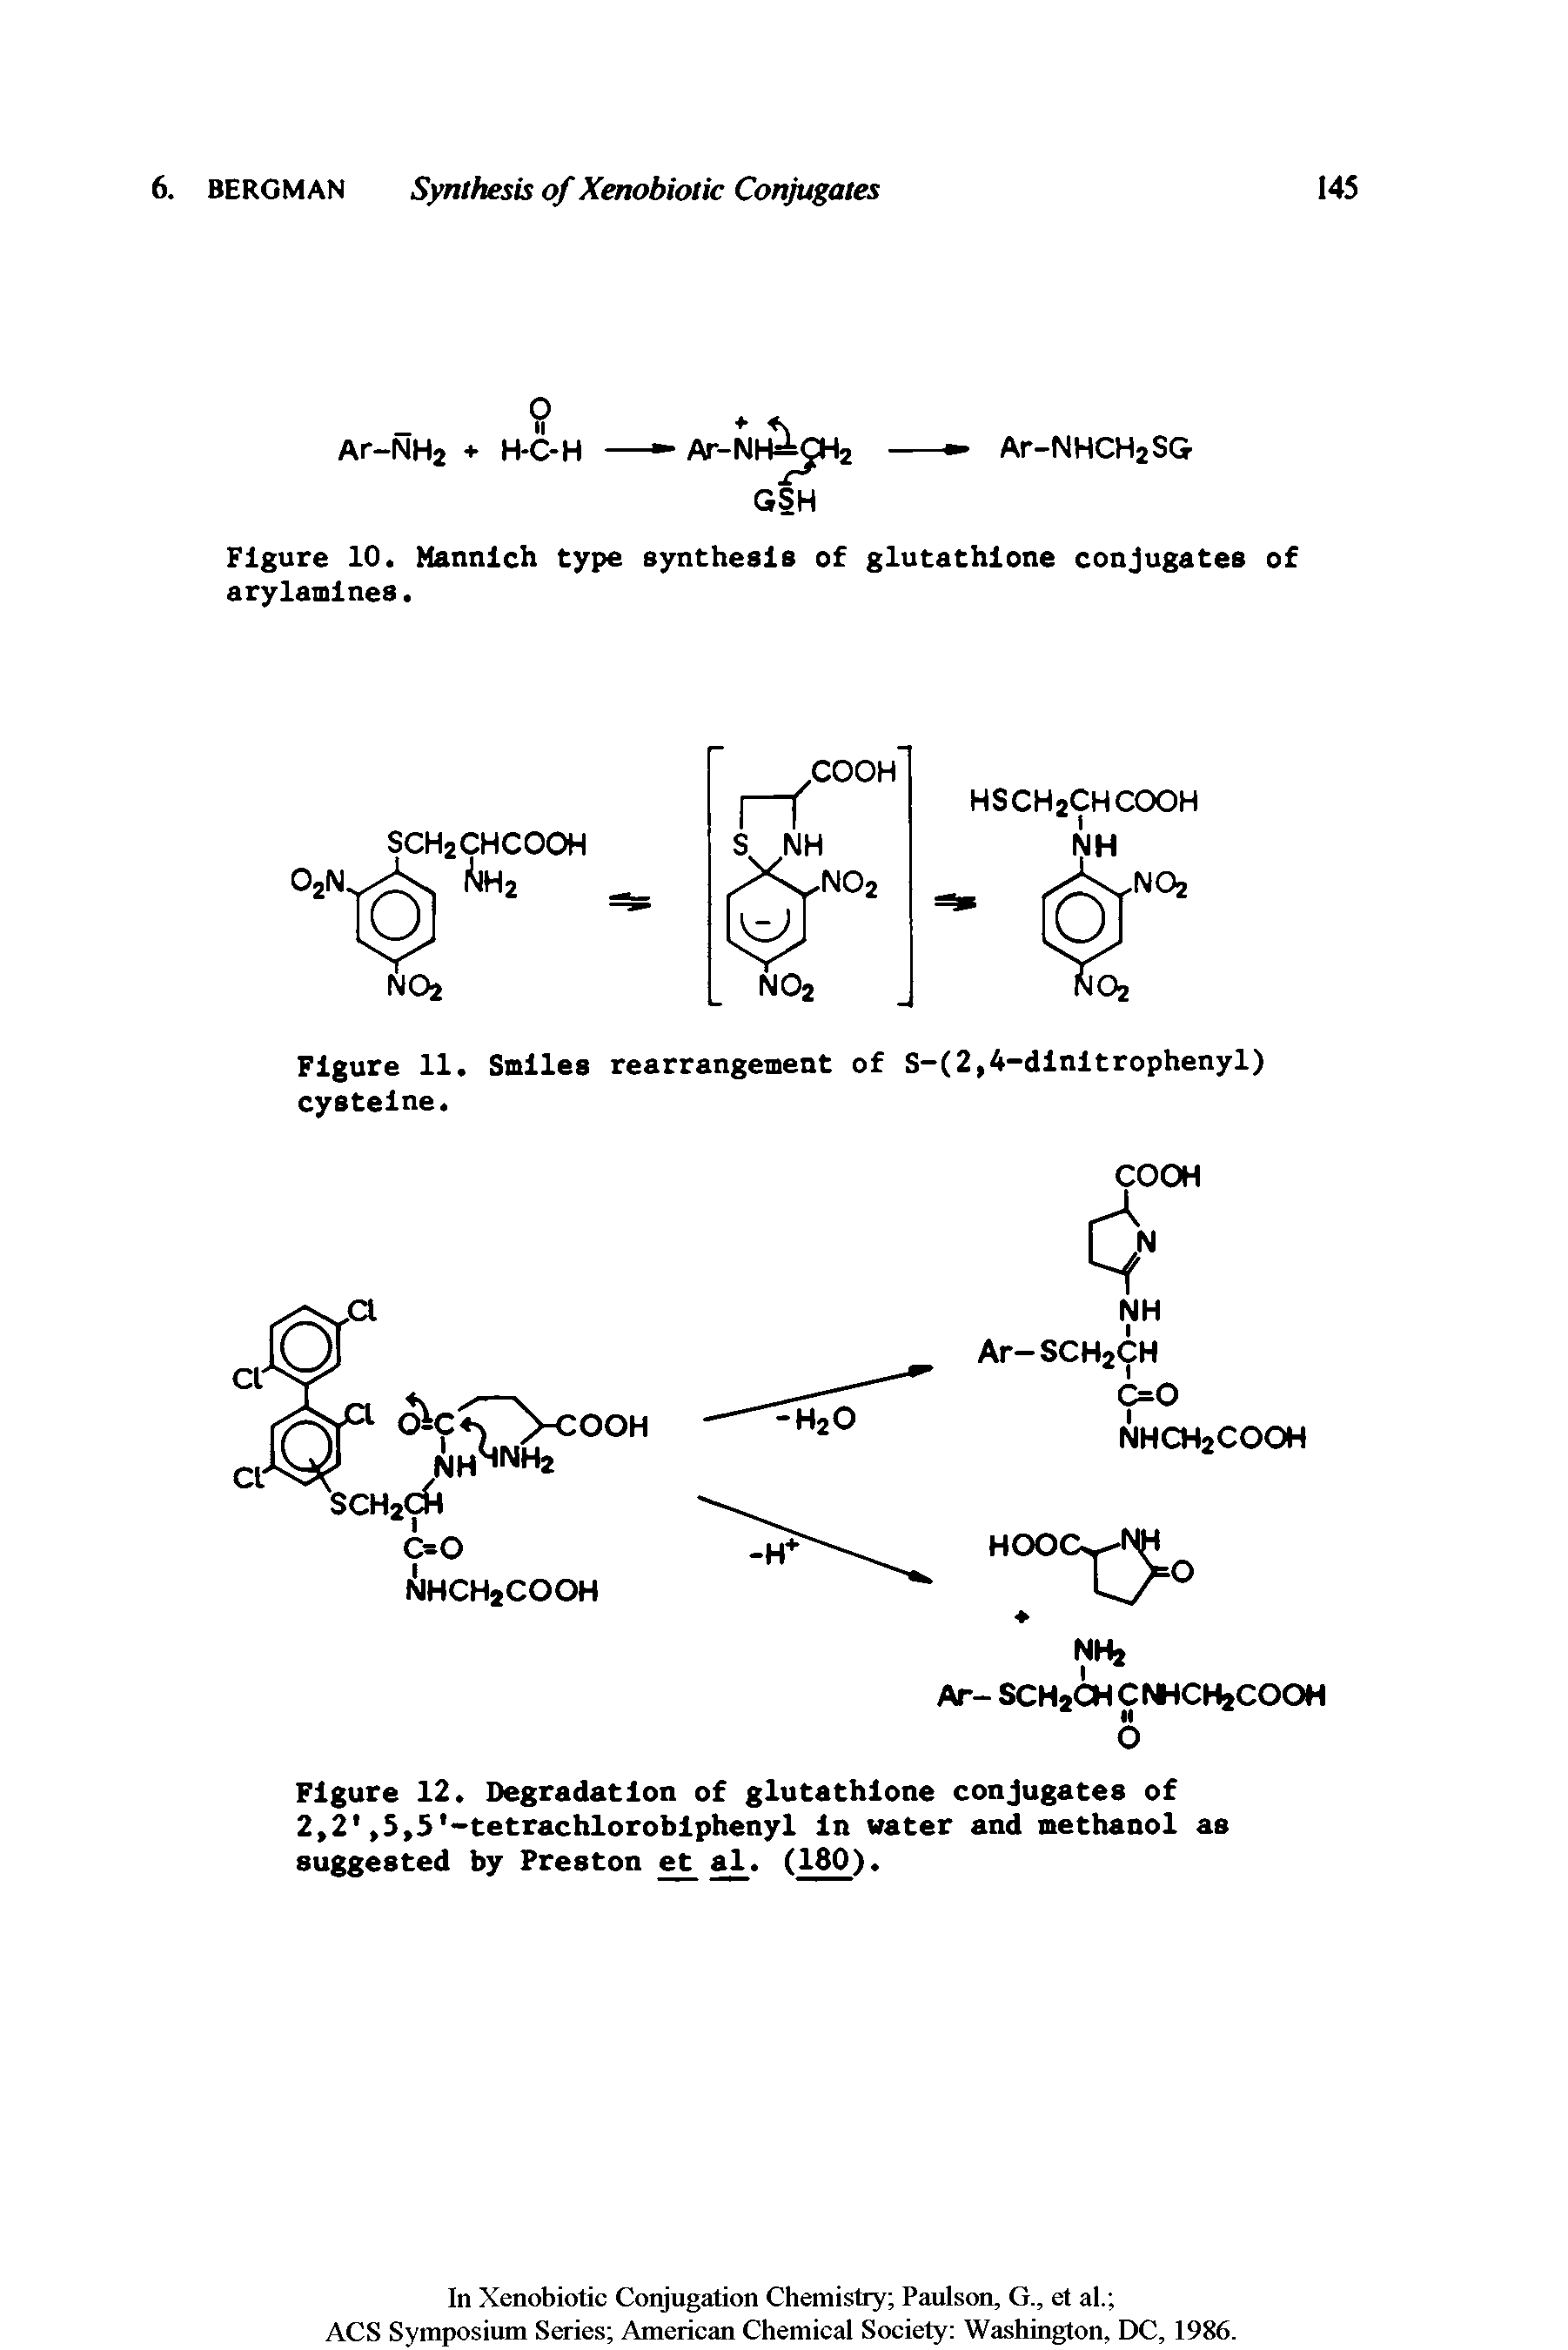 Figure 12. Degradation of glutathione conjugates of 2,2, 5,5 -tetrachloroblphenyl In water and methanol as suggested by Preston et al. (180).